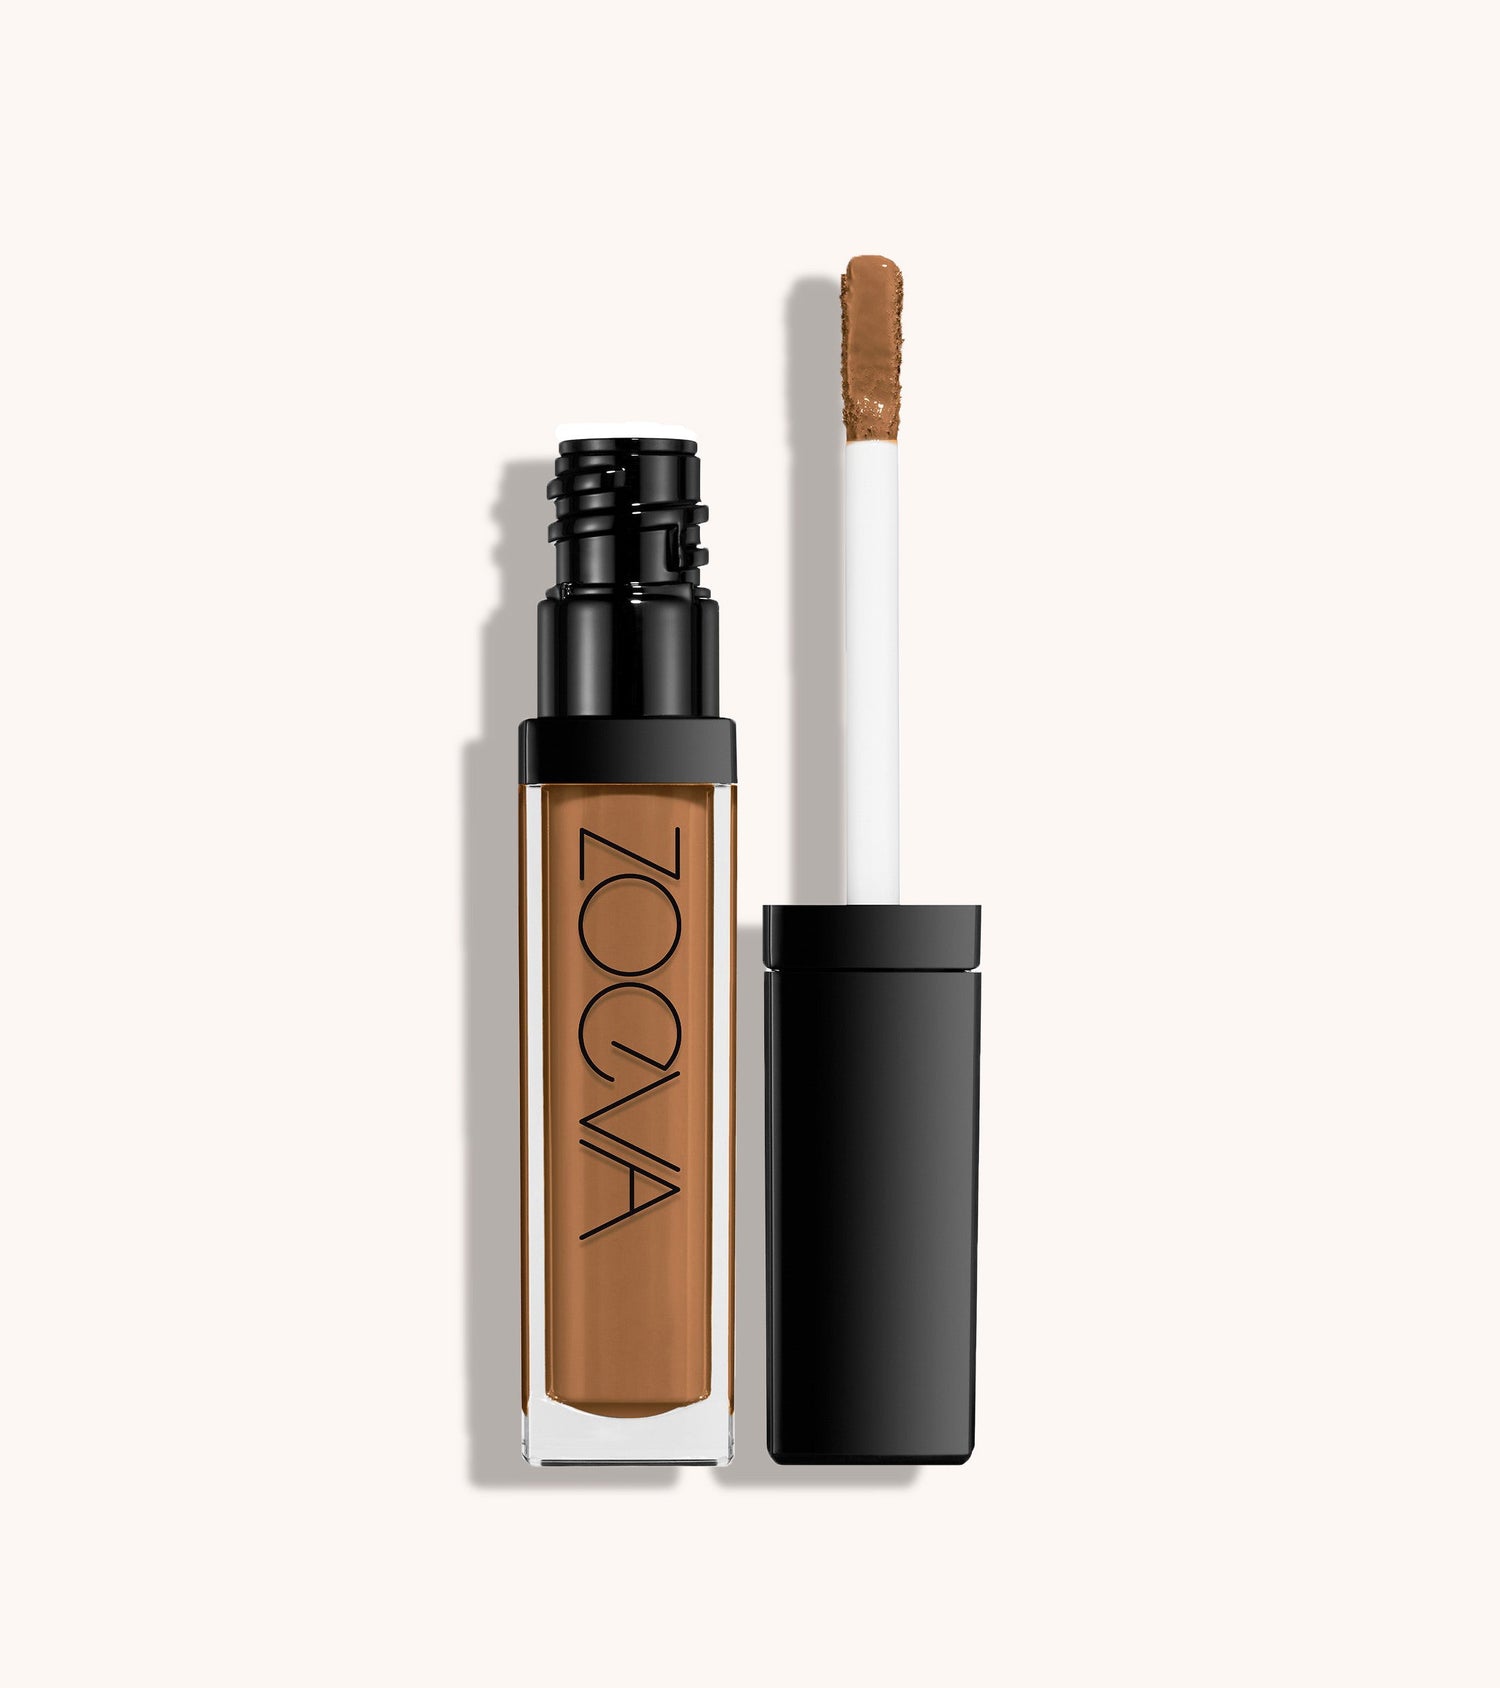 Authentik Skin Perfector Concealer (240 Sincere) Main Image featured